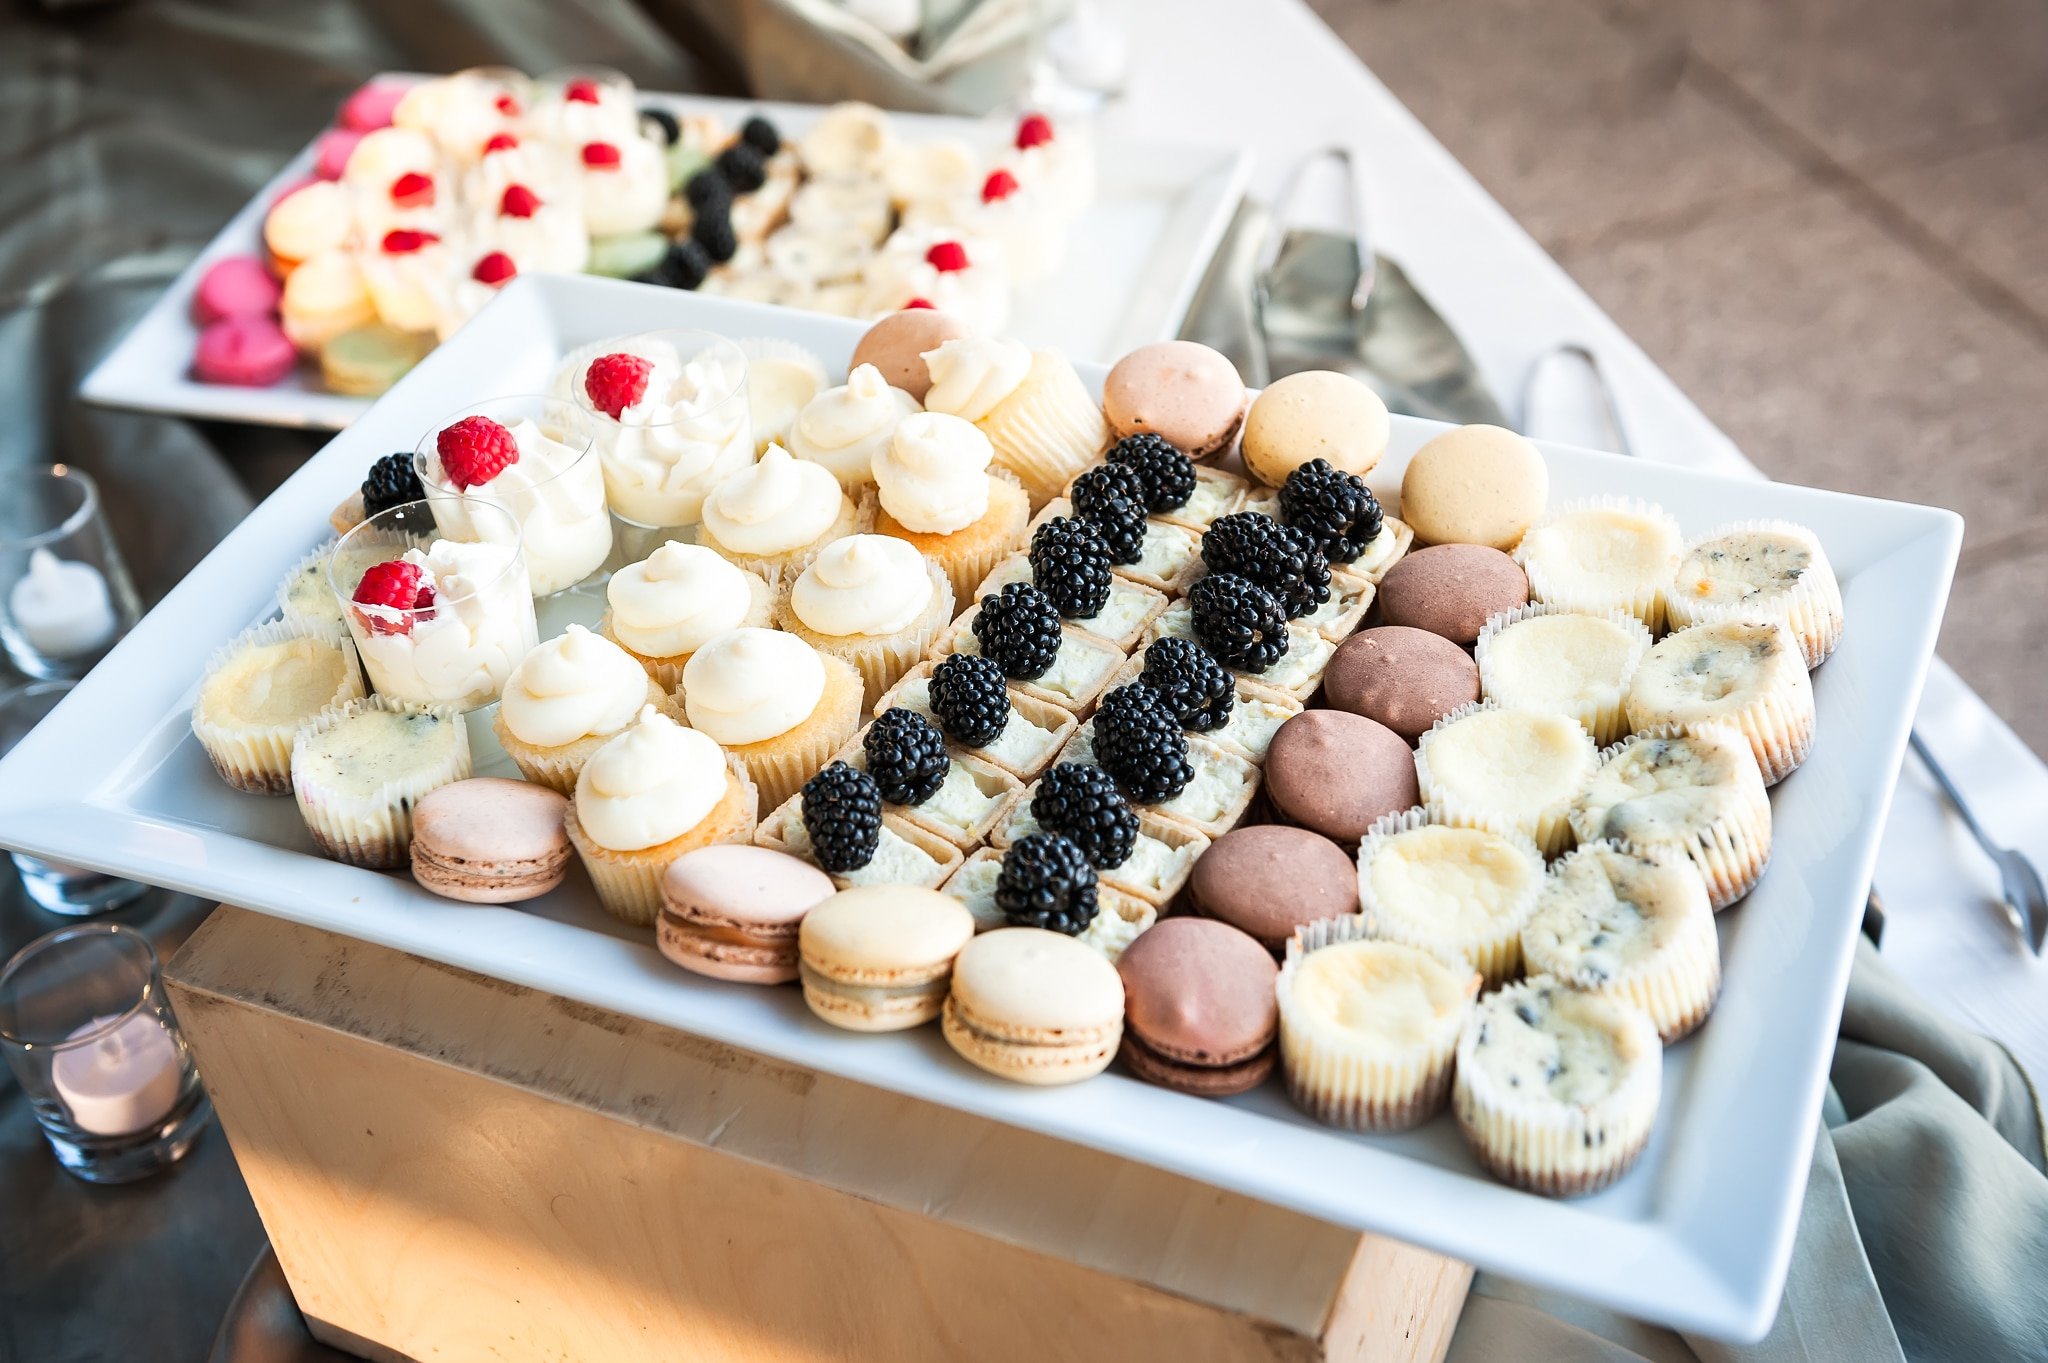 A platter of sweet treats served during a mitzvah celebration.